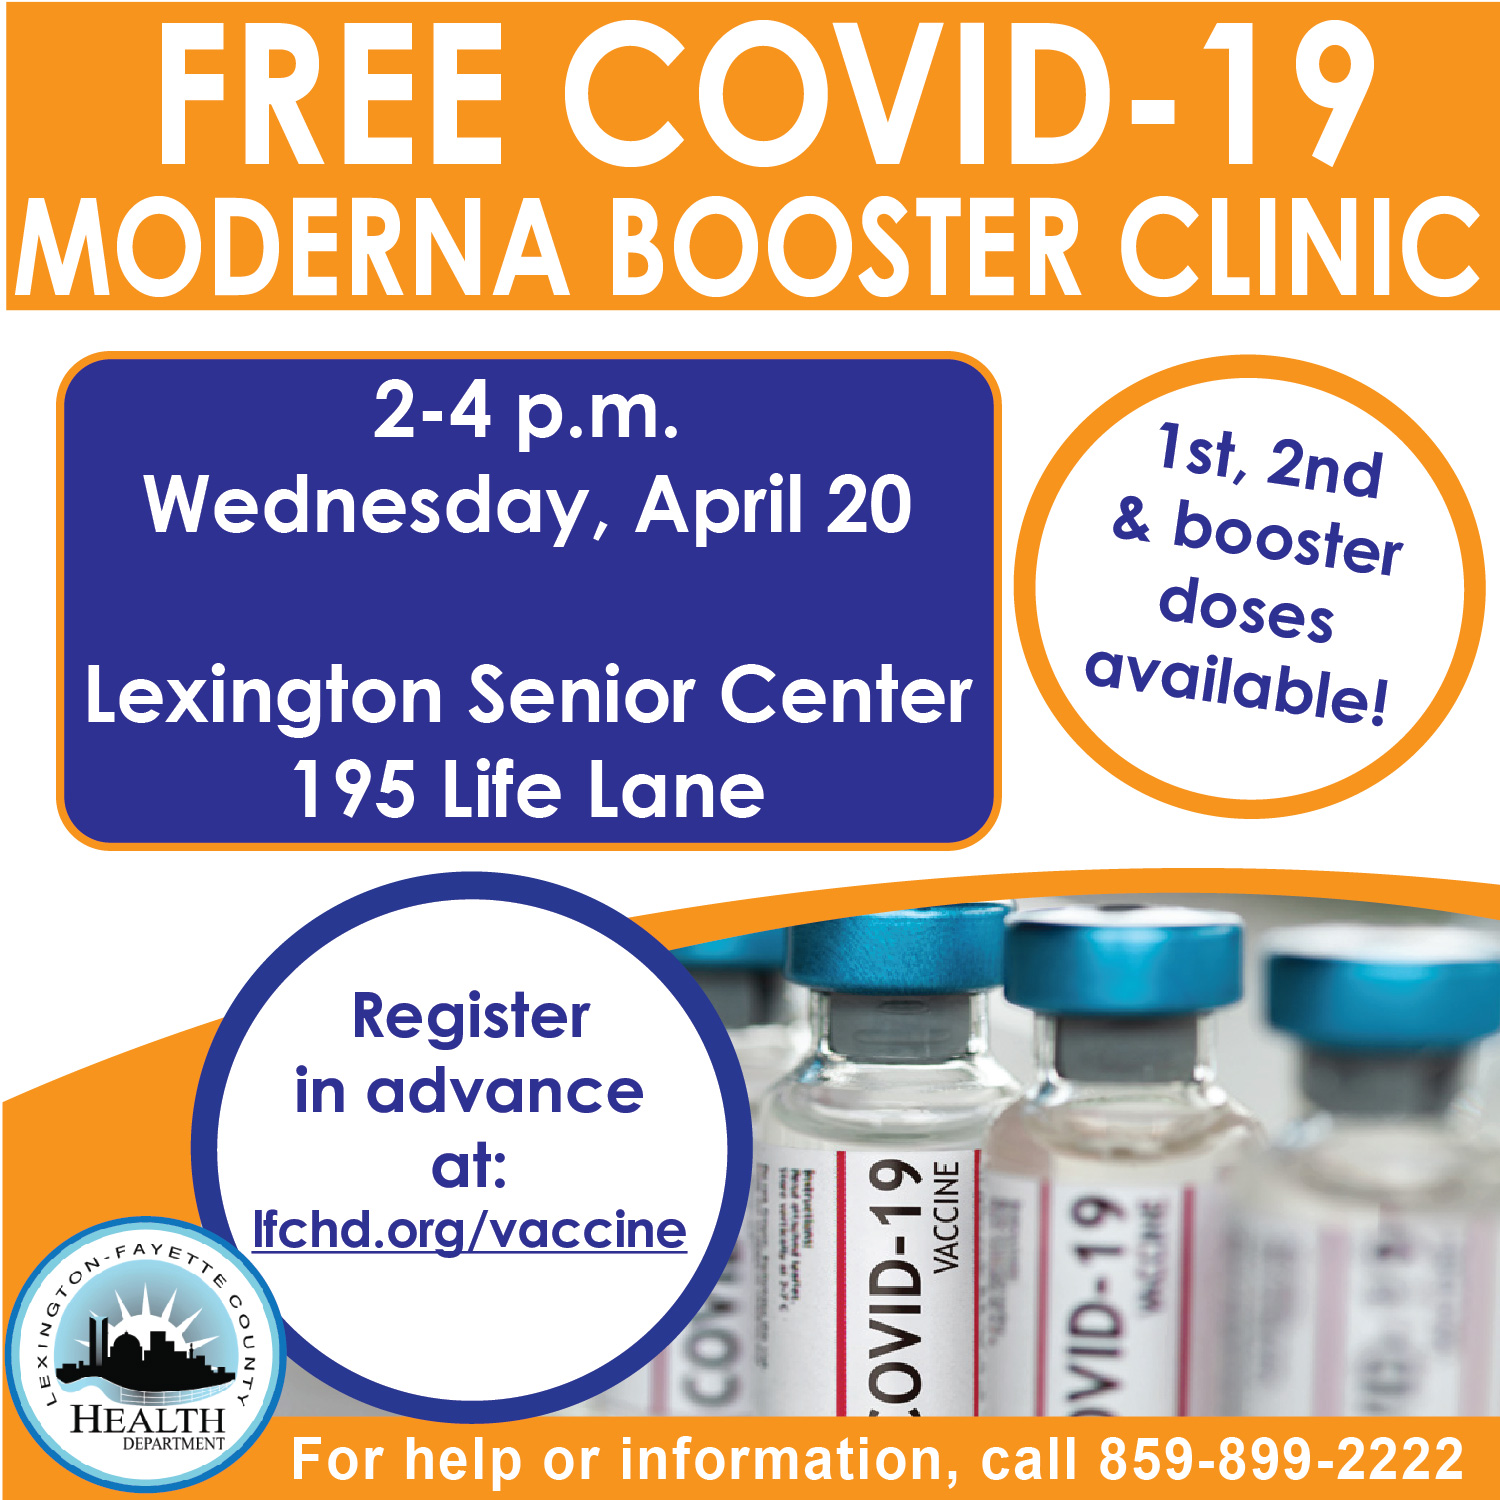 Moderna COVID-19 booster clinic set for April 20